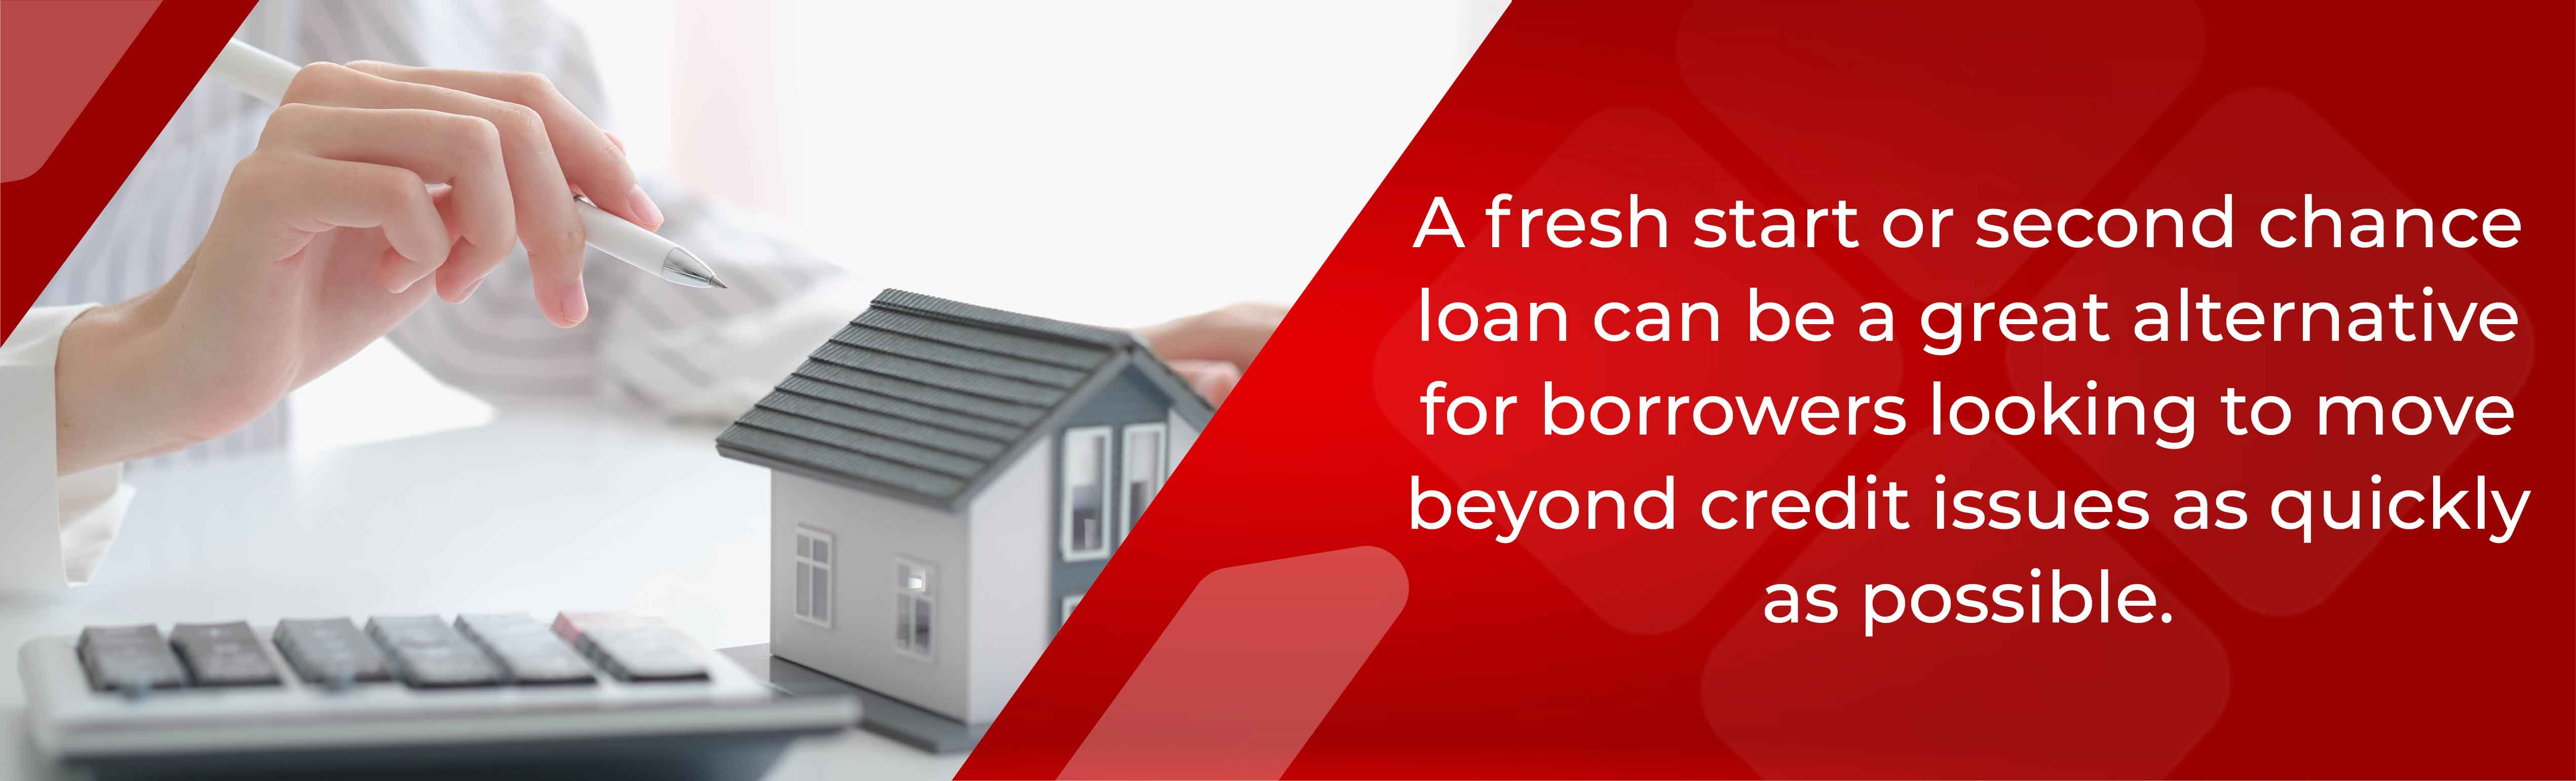 A fresh start or second chance loan can be a great alternative for borrowers looking to move beyond credit issues as quickly as possible. 